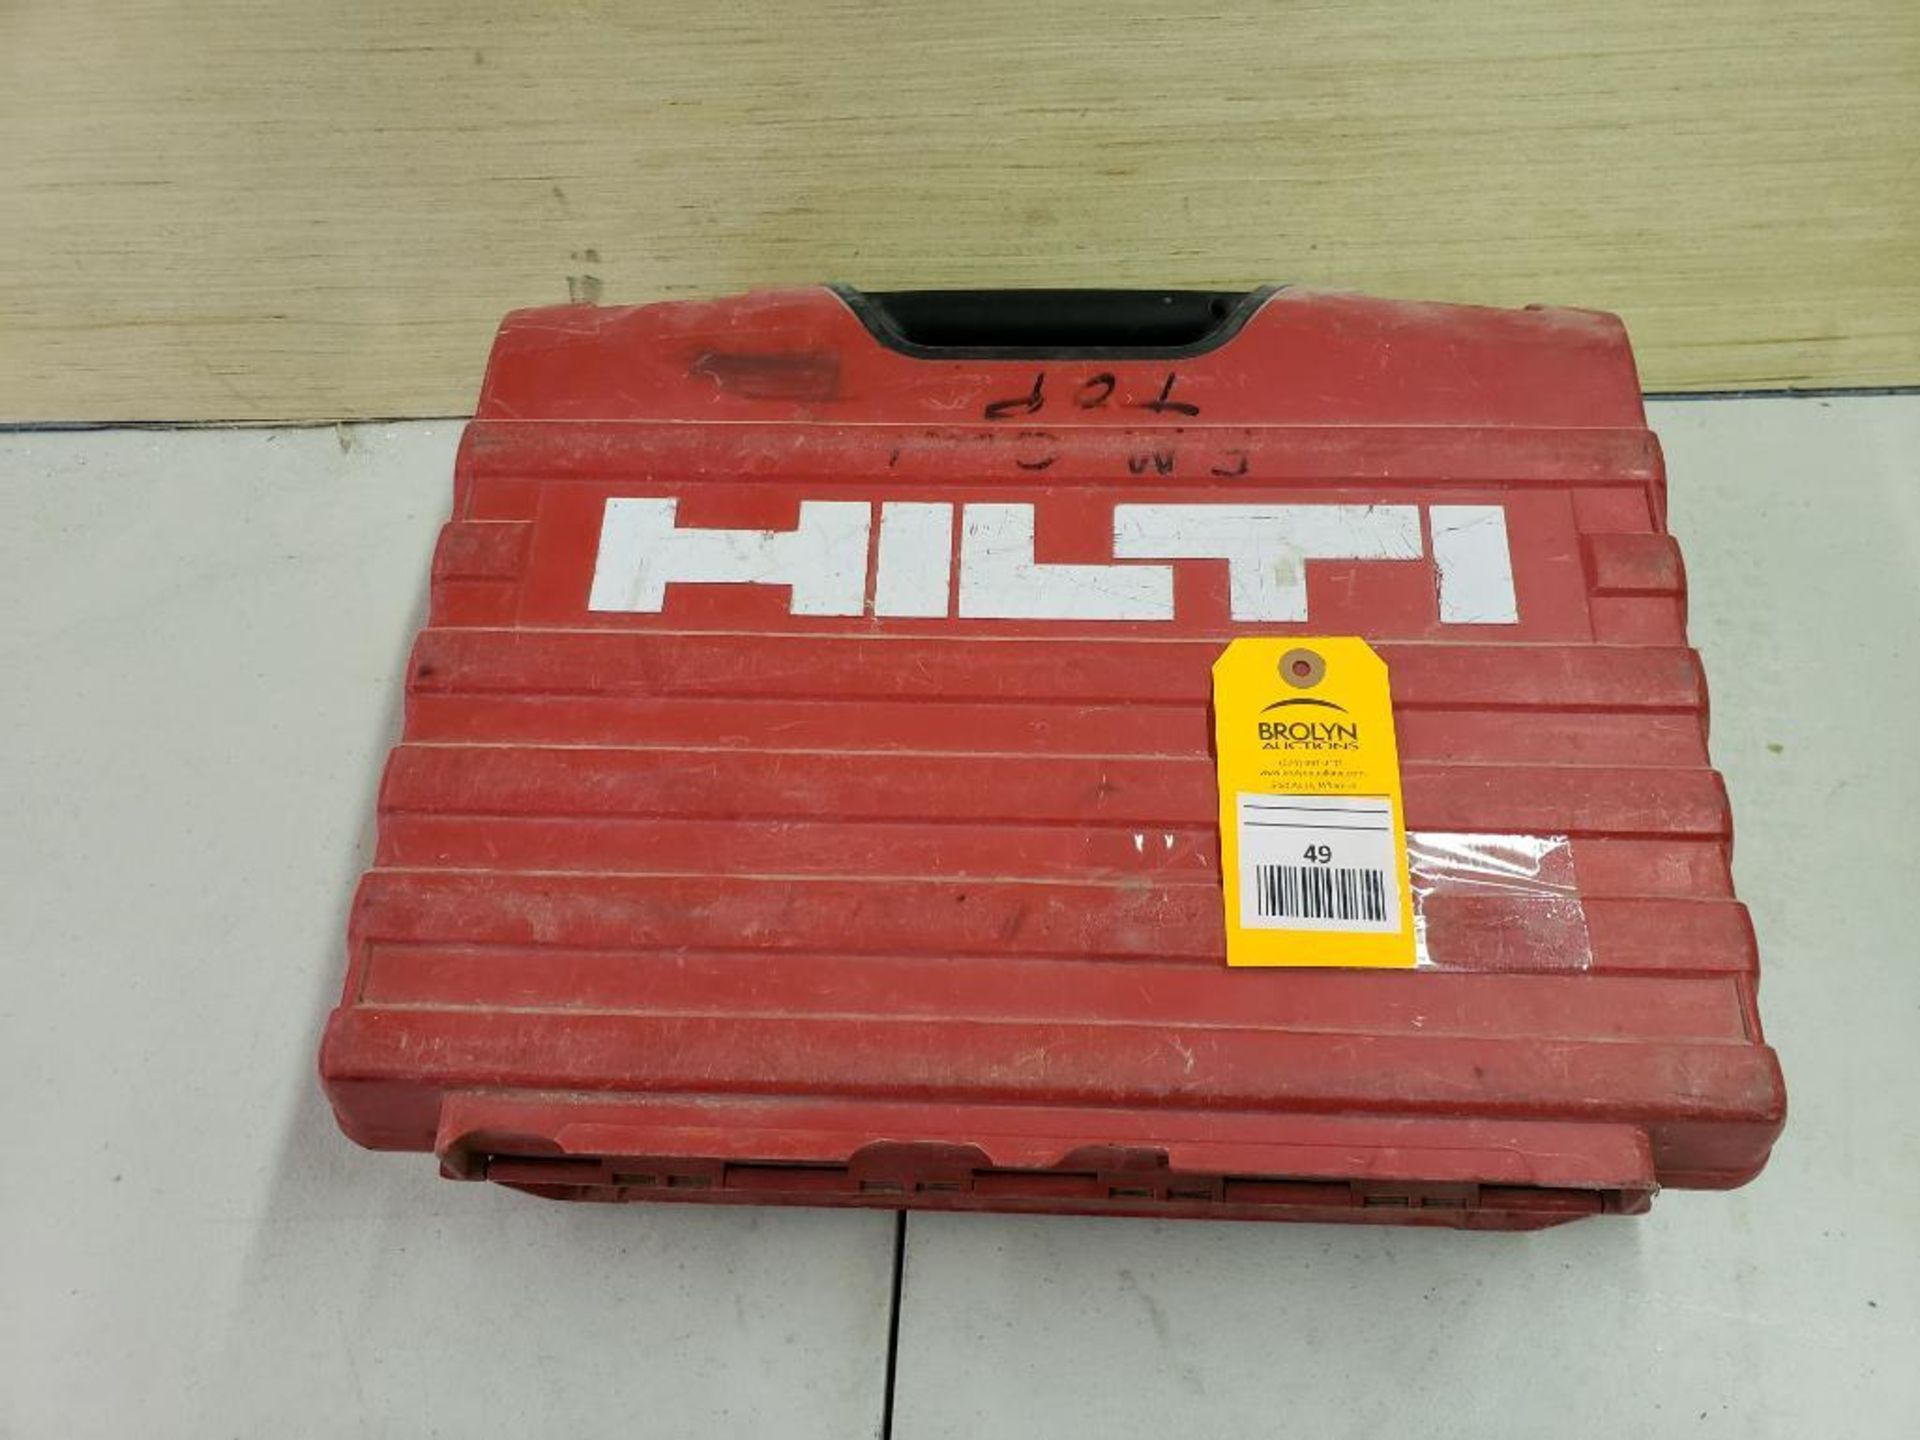 Hilti DX460 powder actuated fastening tool, with MX72 nail magazine. - Image 2 of 8